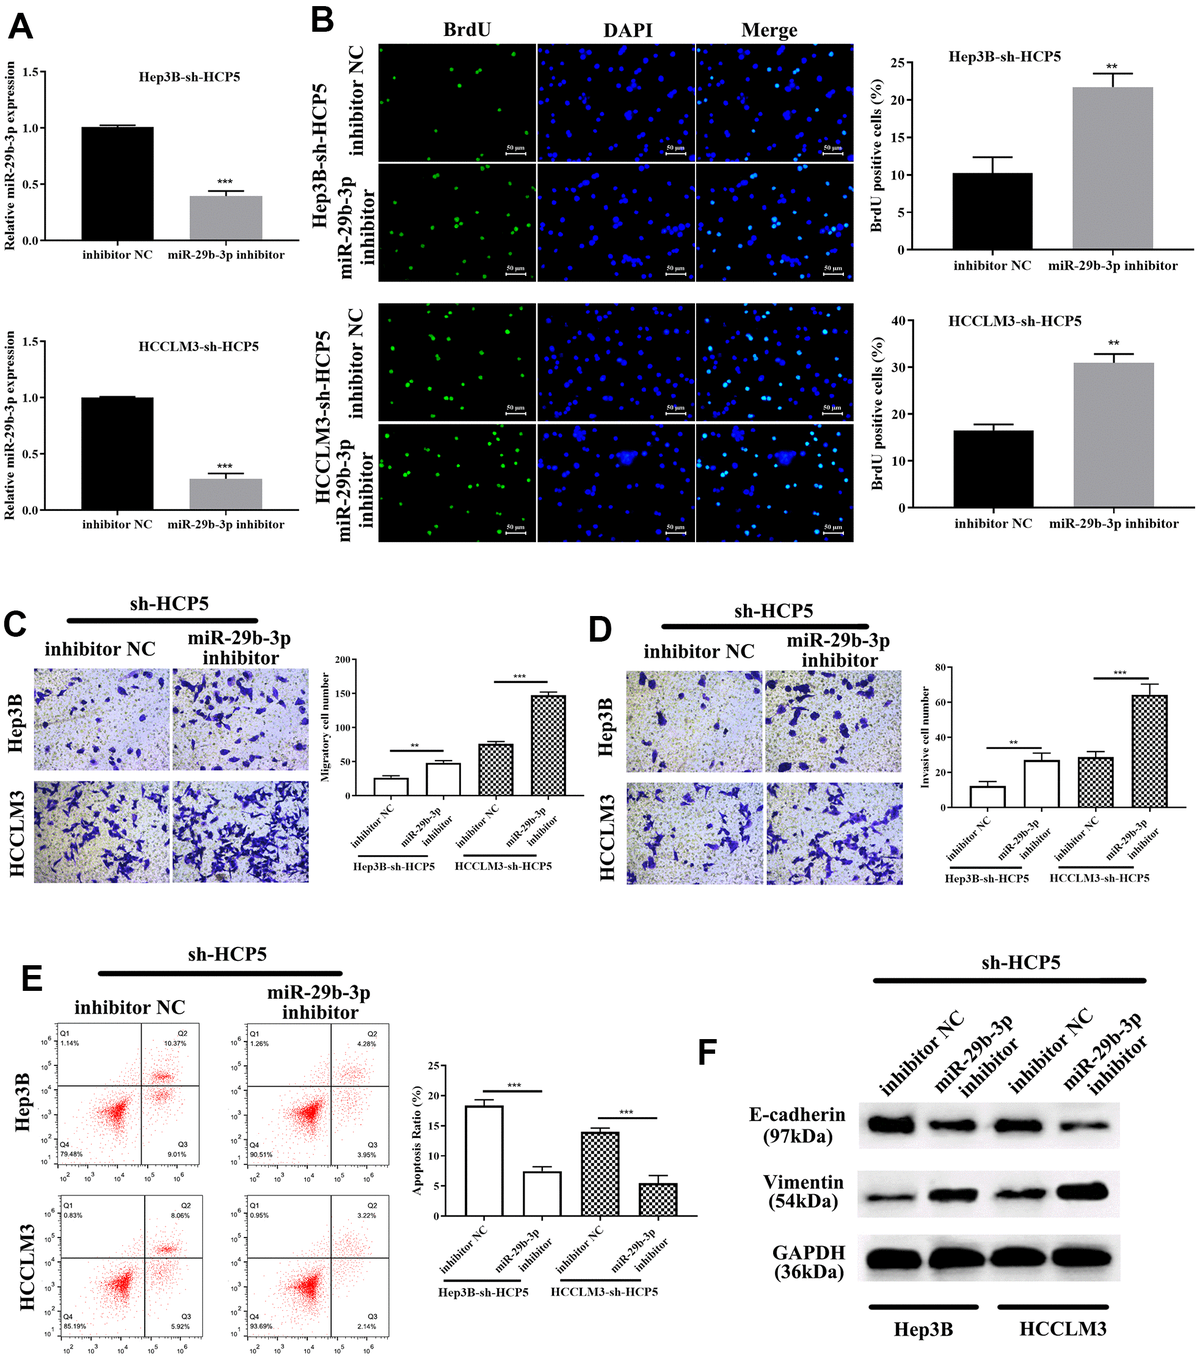 miR-29b-3p reverses HCC proliferation, migration and invasion that is attenuated by sh-HCP5. (A) The quantities of miR-29b-3p reduce in HCP5 knockdown cells when treated with an miR-29b-3p inhibitor. (B) miR-29b-3p is up-regulated when HCP5 is knocked down, and when cells were treated with miR-29b-3p inhibitor, the proliferation increased both in HCCLM3 and Hep3B cell lines (**pC, D) Down-regulation of miR-29b-3p significantly promotes cell migration and invasion (**pE) Cell apoptosis decreases after administration of miR-29b-3p inhibitor to two cell lines that were transfected with sh-HCP5. (F) miR-29b-3p inhibitor restores the EMT progress induced by sh-HCP5 both in HCCLM3 and Hep3B cell lines.